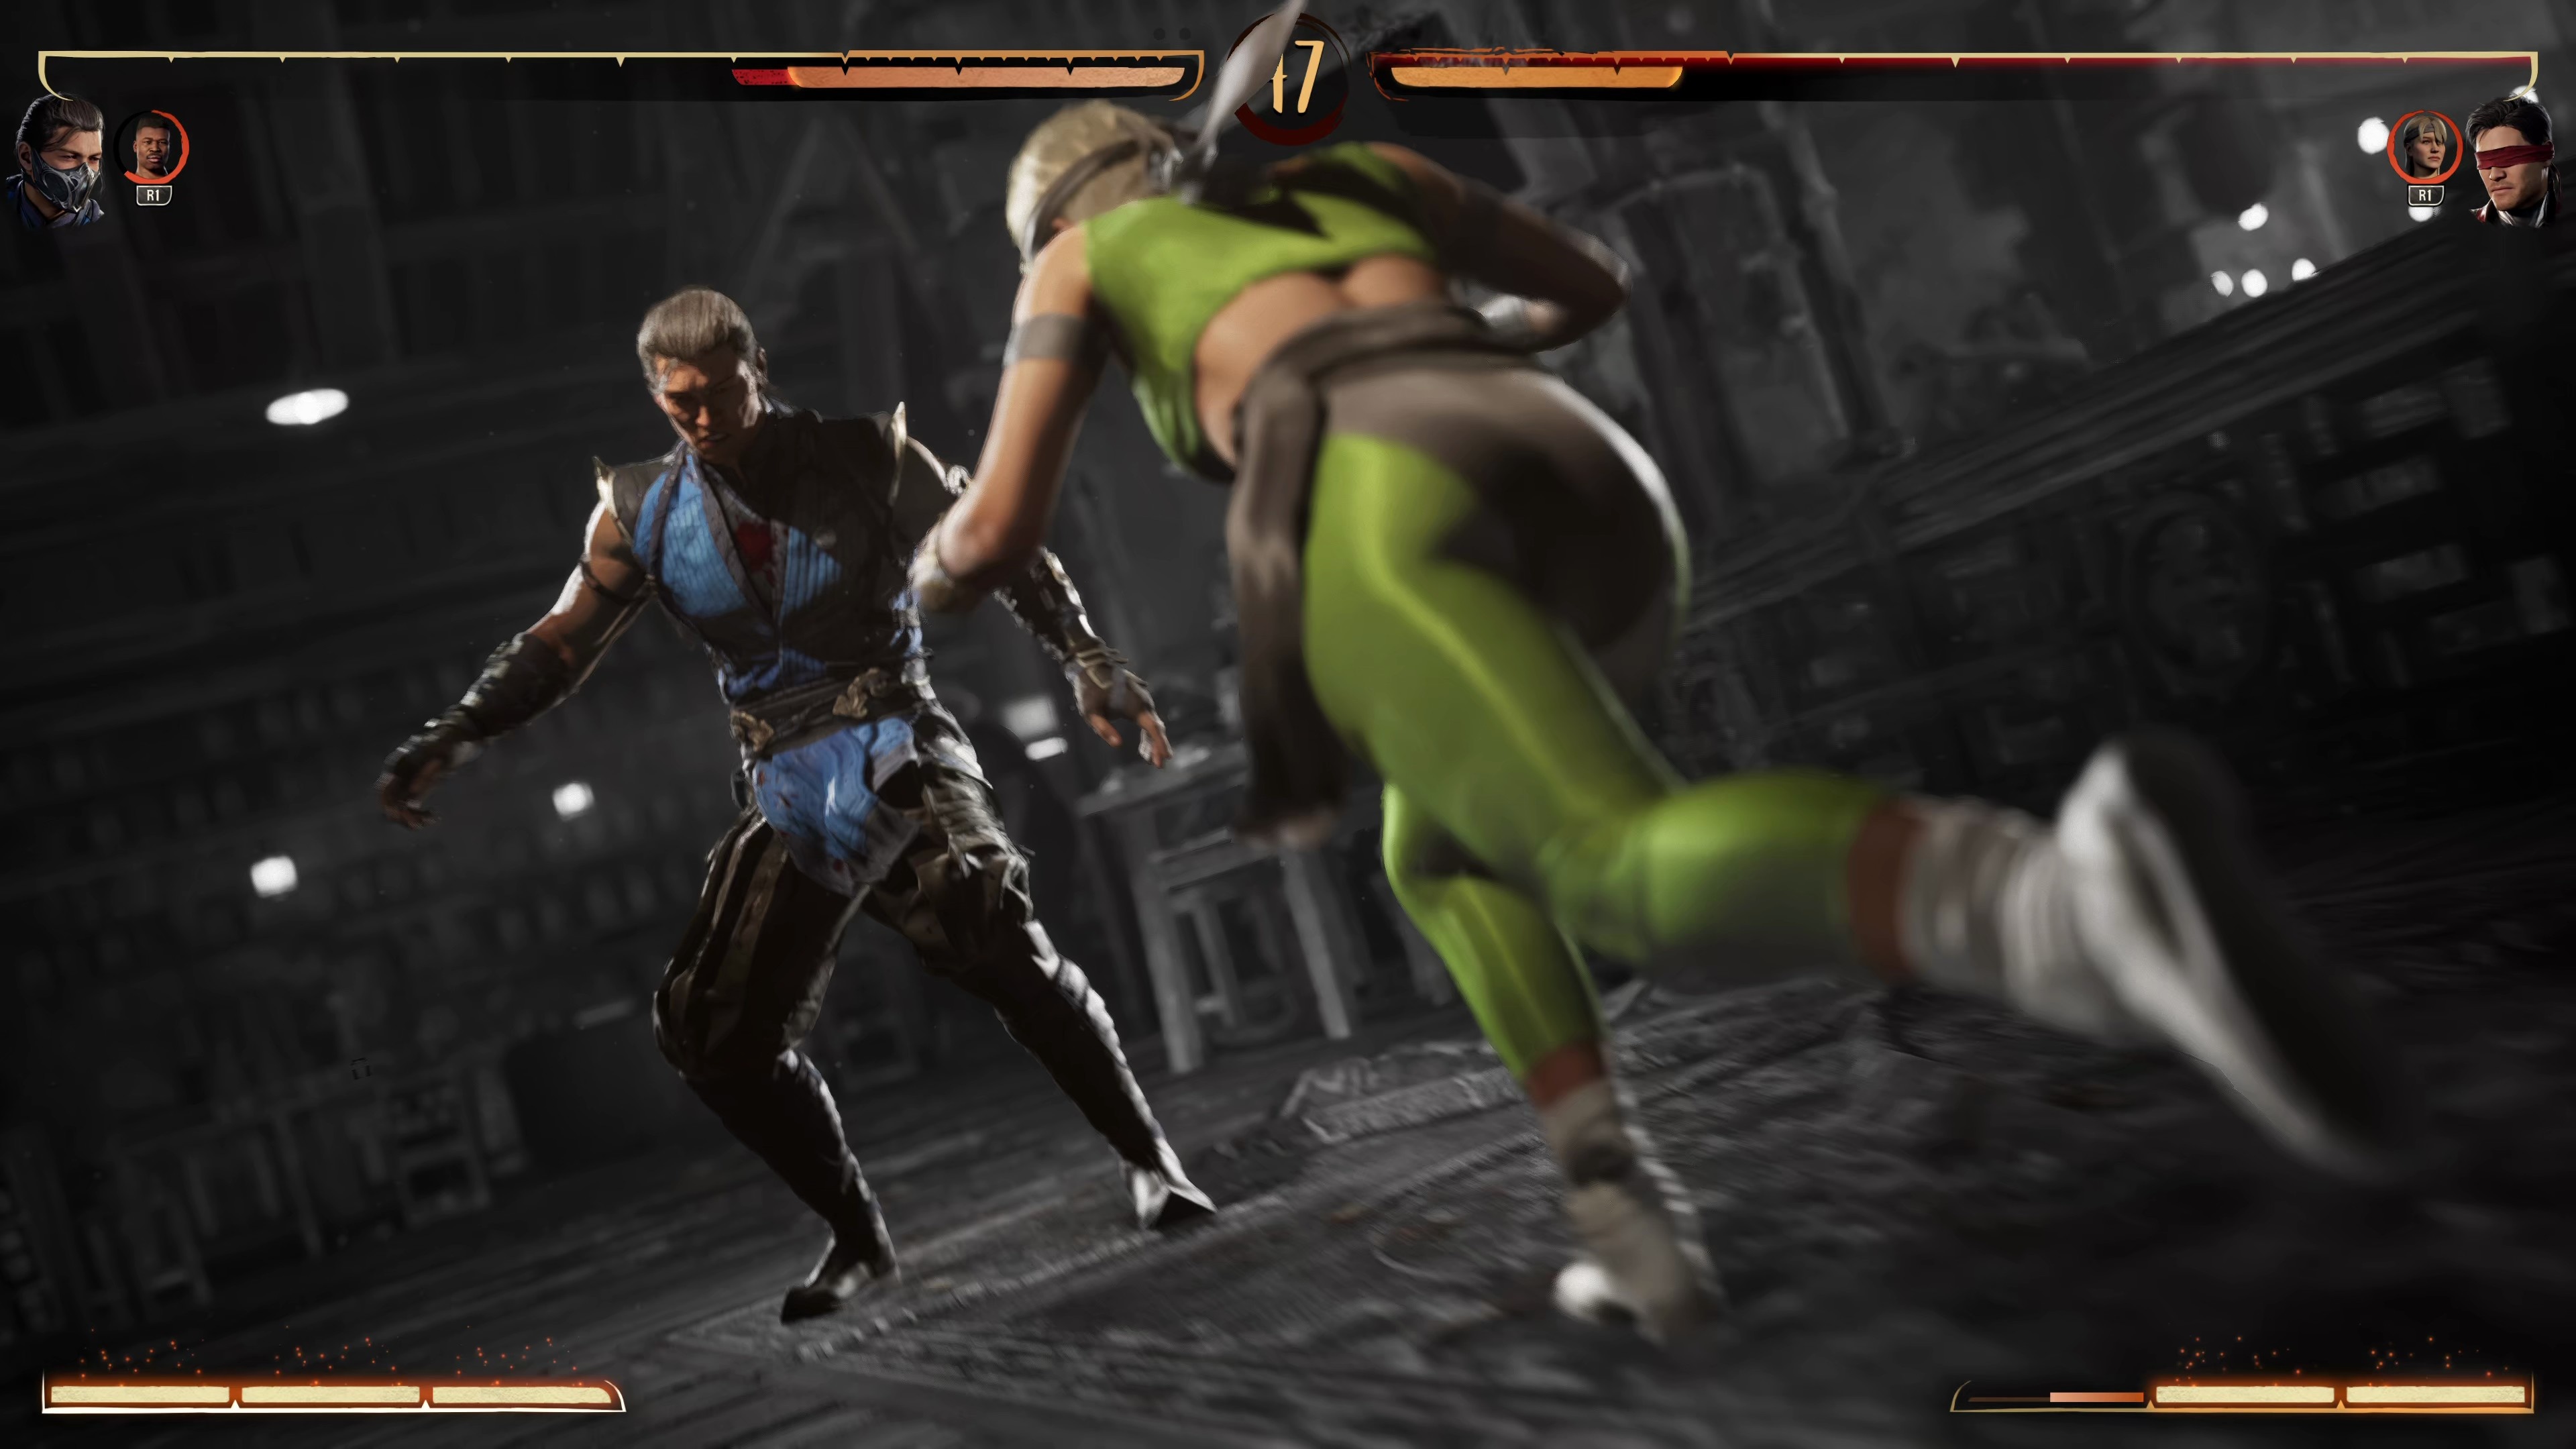 (Sonya jumps into the action at the drop of a hat and gives Sub Zero a painful kick to the ribs here.)